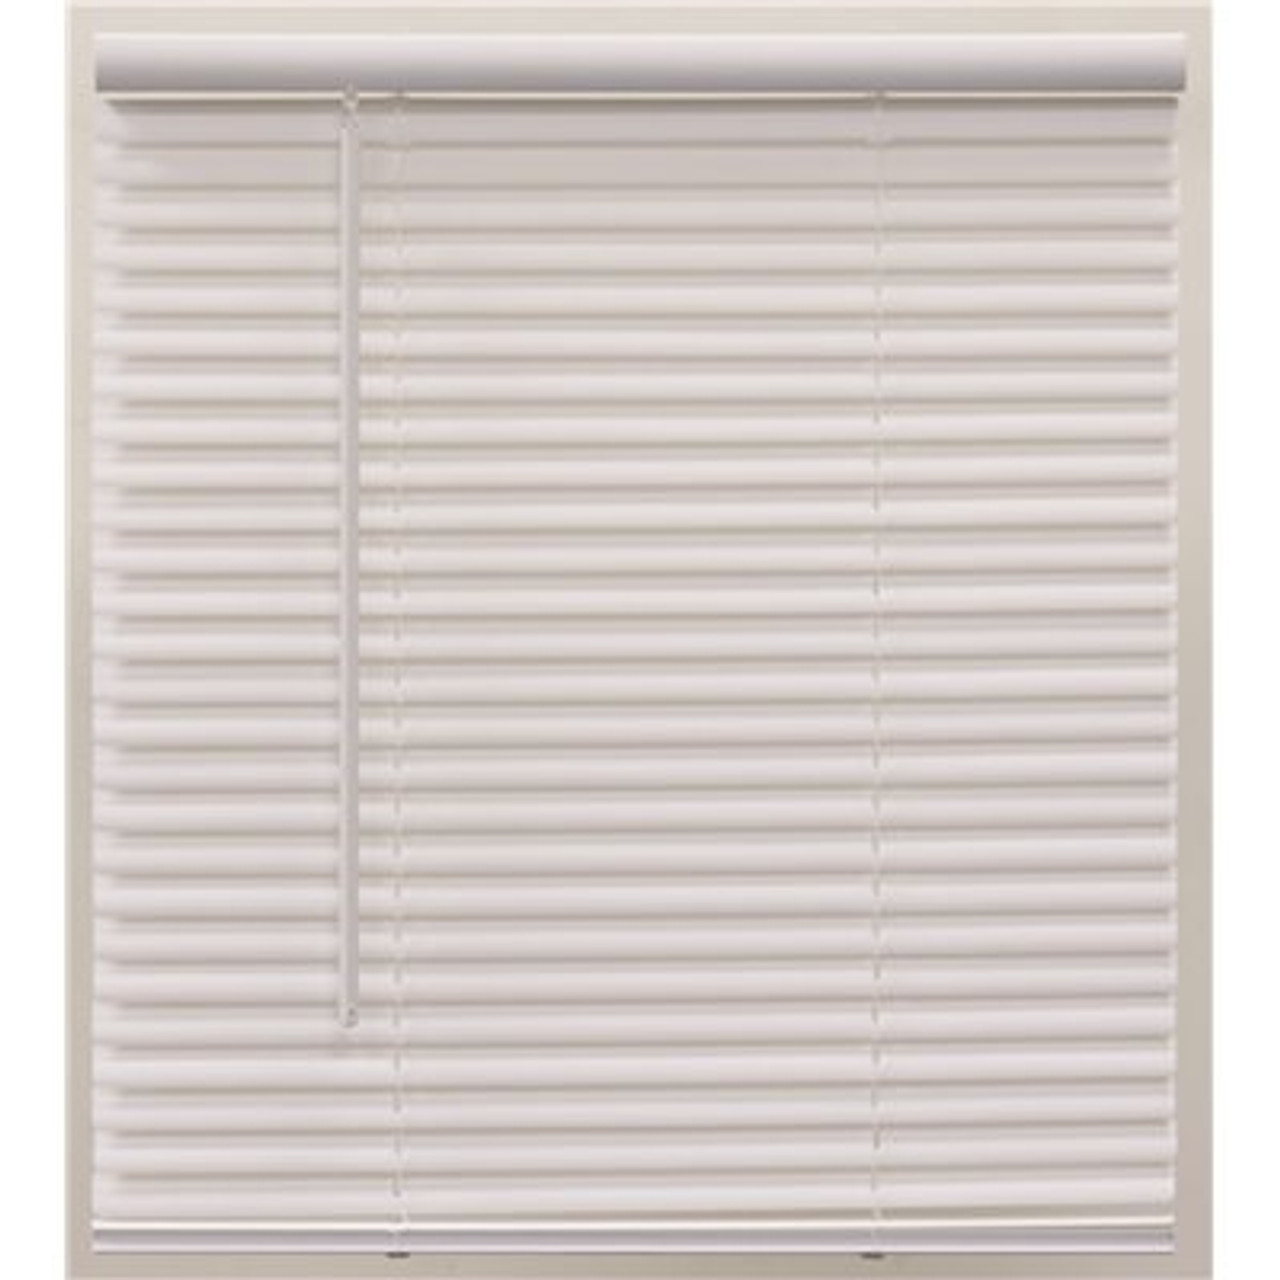 Champion Pre-Cut 45.5 in. W x 48 in.White Cordless Light Filtering Vinyl Mini Blind with 1 in. Slats